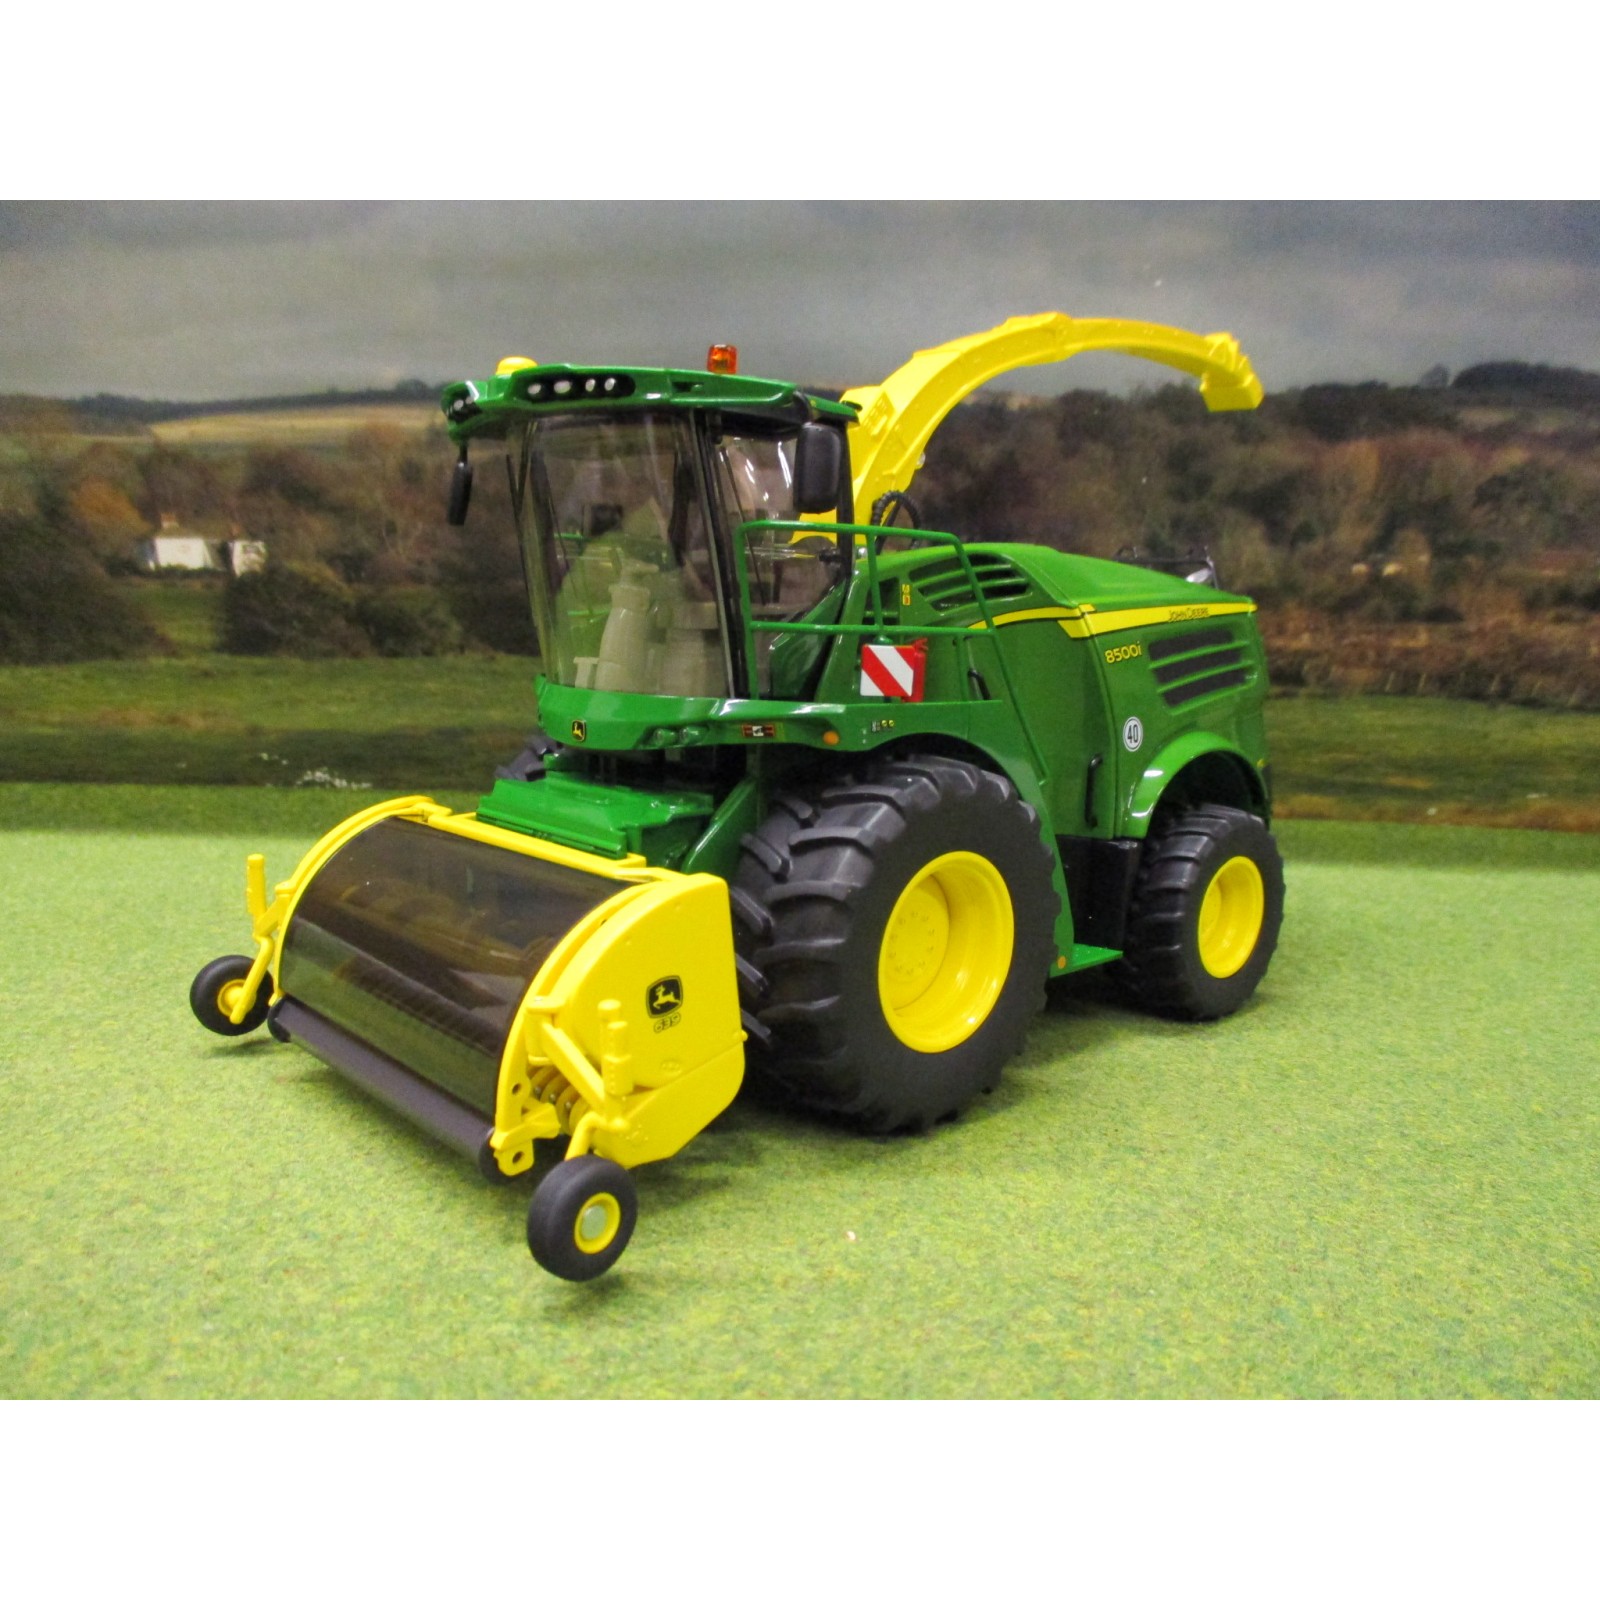 WIKING 1:32 JOHN DEERE 8500i FORAGER WITH GRASS  MAIZE HEADERS - One32  Farm toys and models